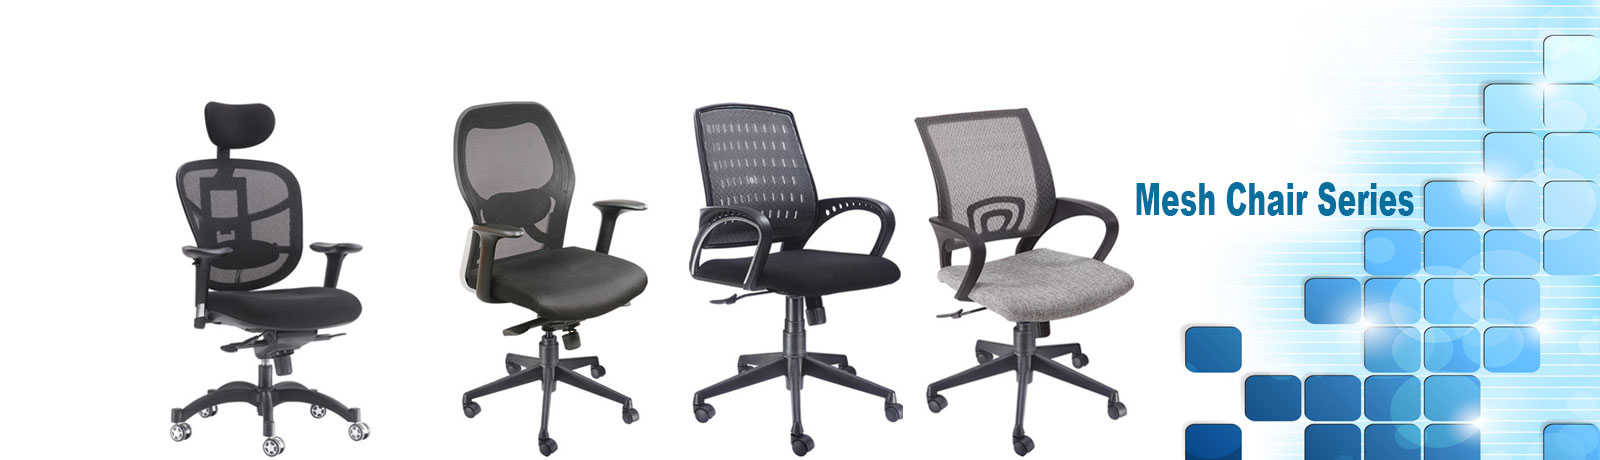 Best Quality Office Chairs Manufacturer in Gurgaon